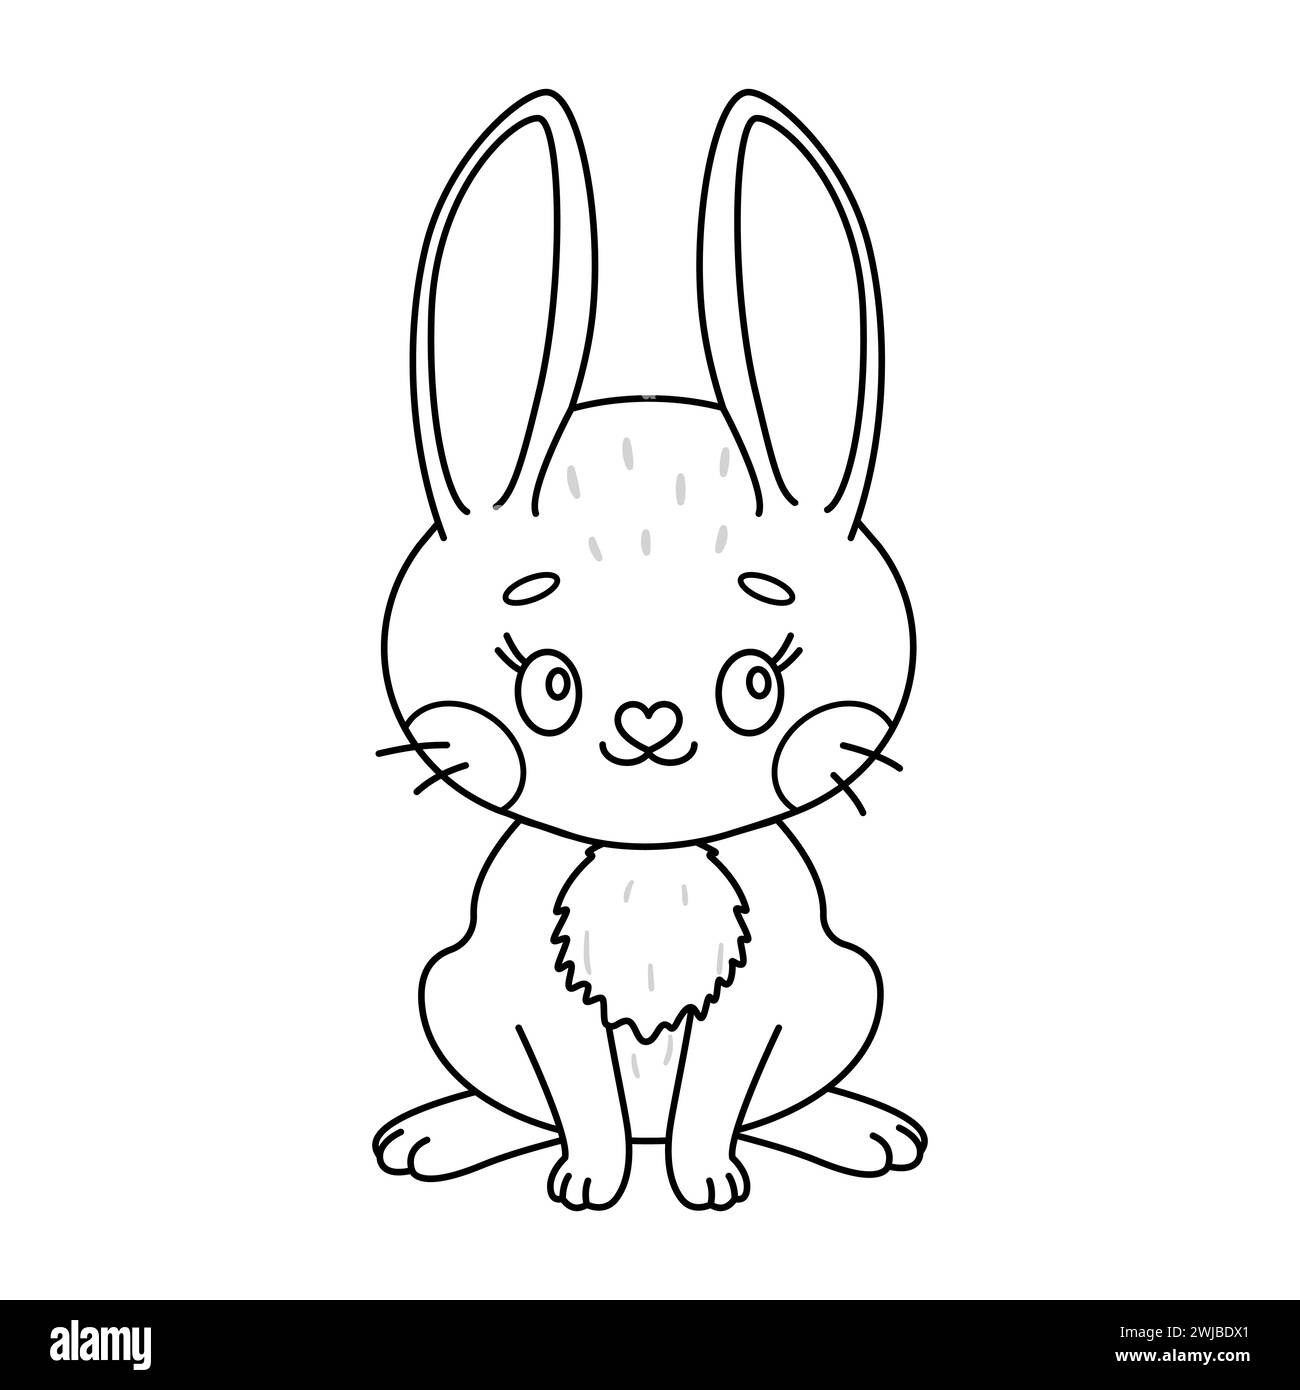 Cartoon easter Bunny. Cute rabbit. Kawaii bunny sitting. Coloring page for kids and adults. Vector illustration. Stock Vector